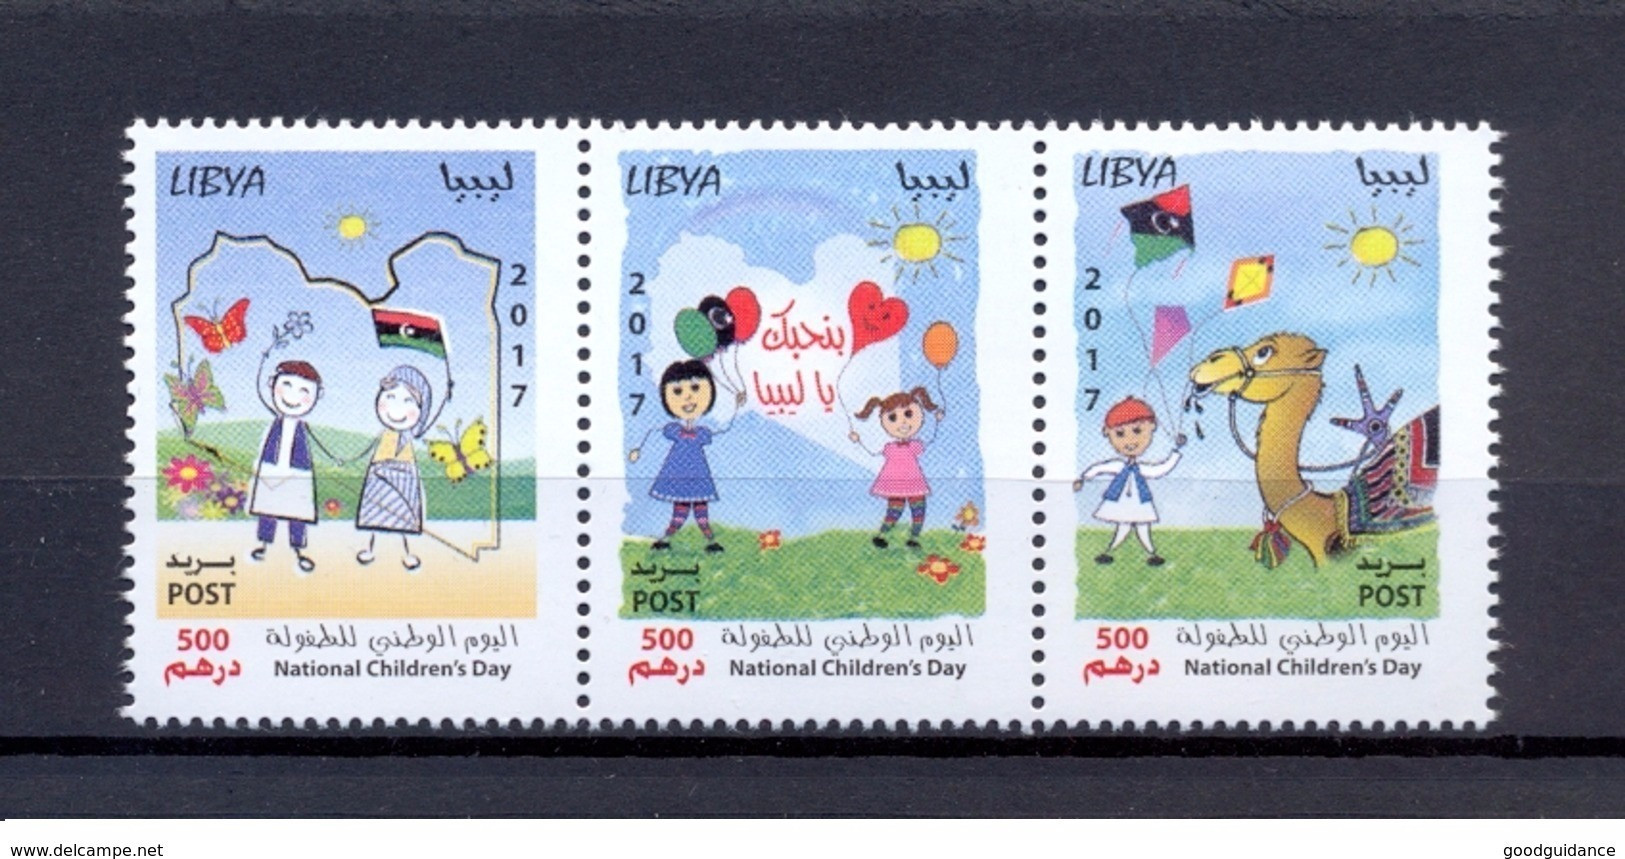 2017- Libya- Libye- National Children's Day - Butterflies, Camel, Flag, Love- Strip Of 3 Stamps- MNH** - Libia